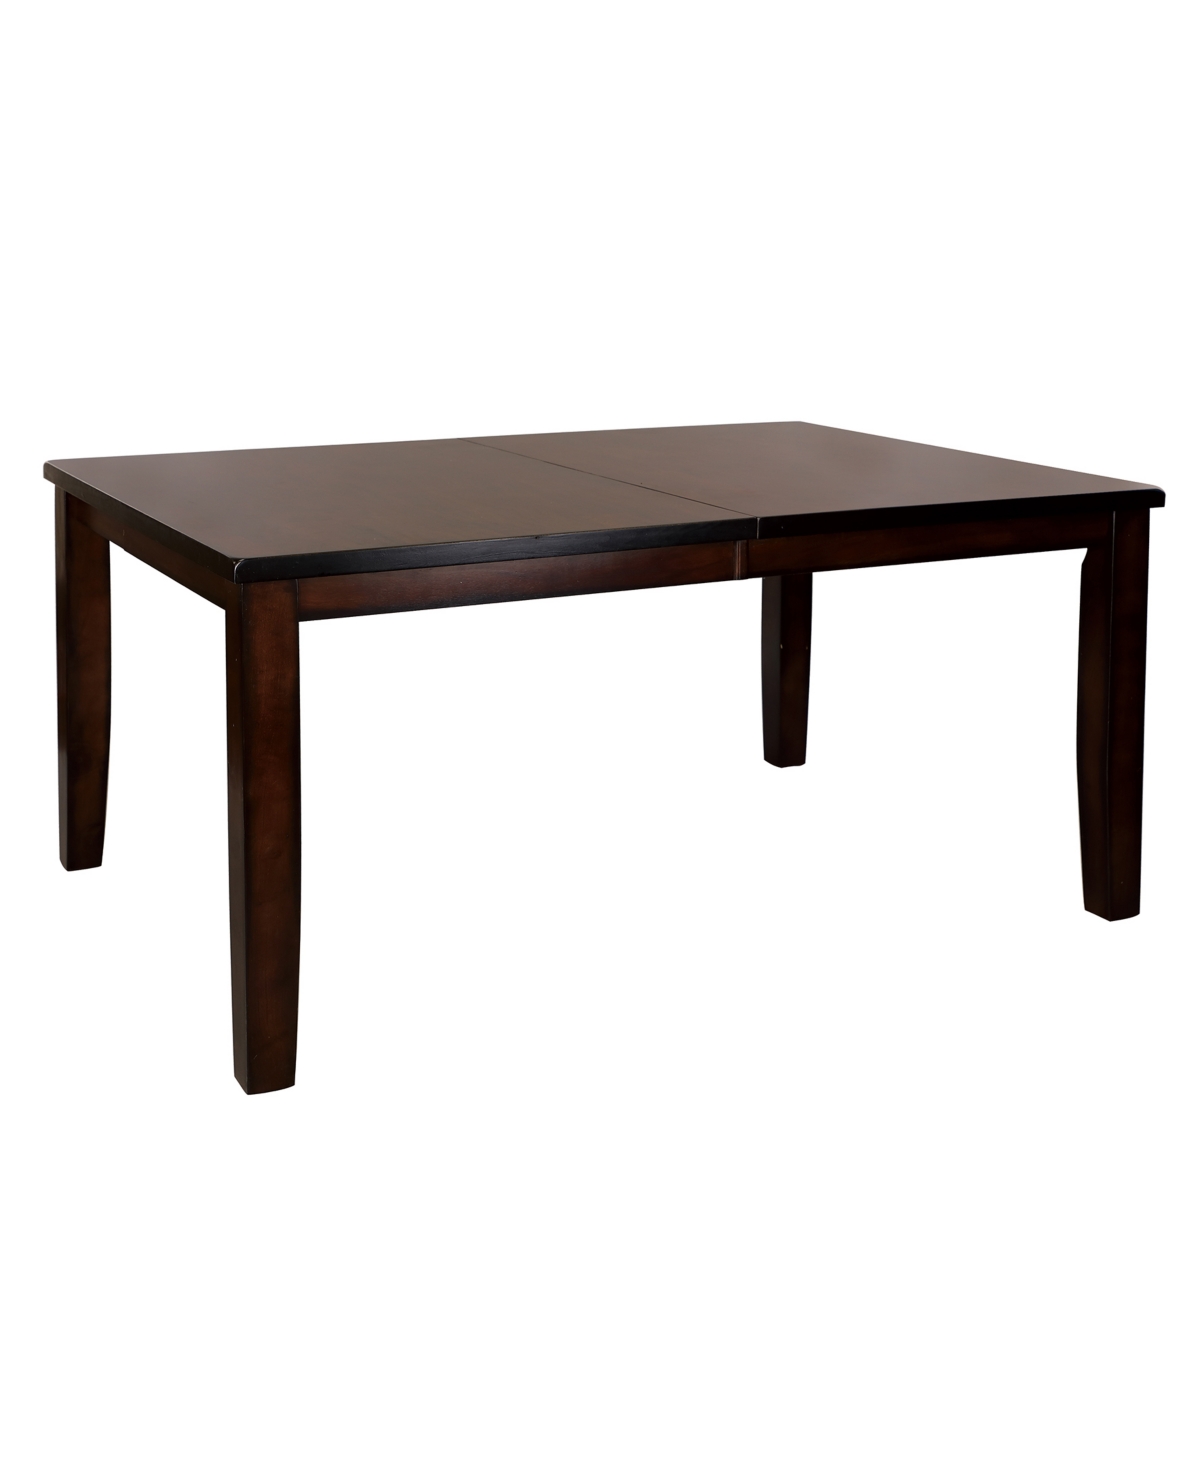 Furniture Leona Dining Table In Cherry